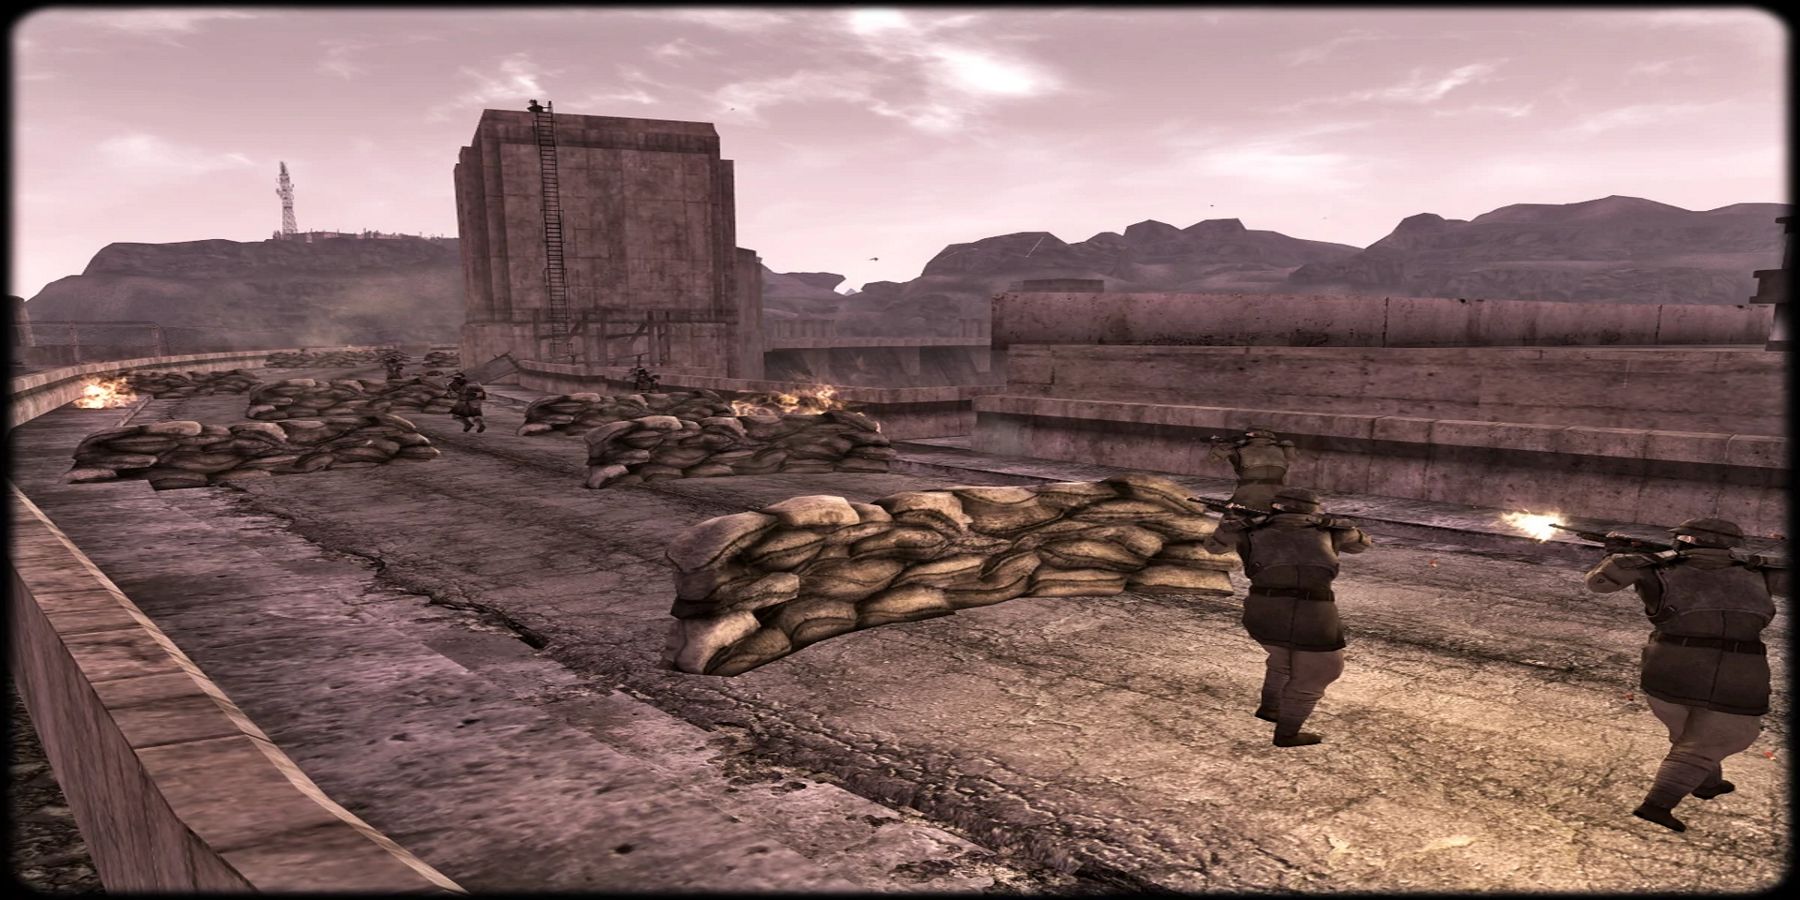 NCR soldiers fighting the Legion at Hoover Dam